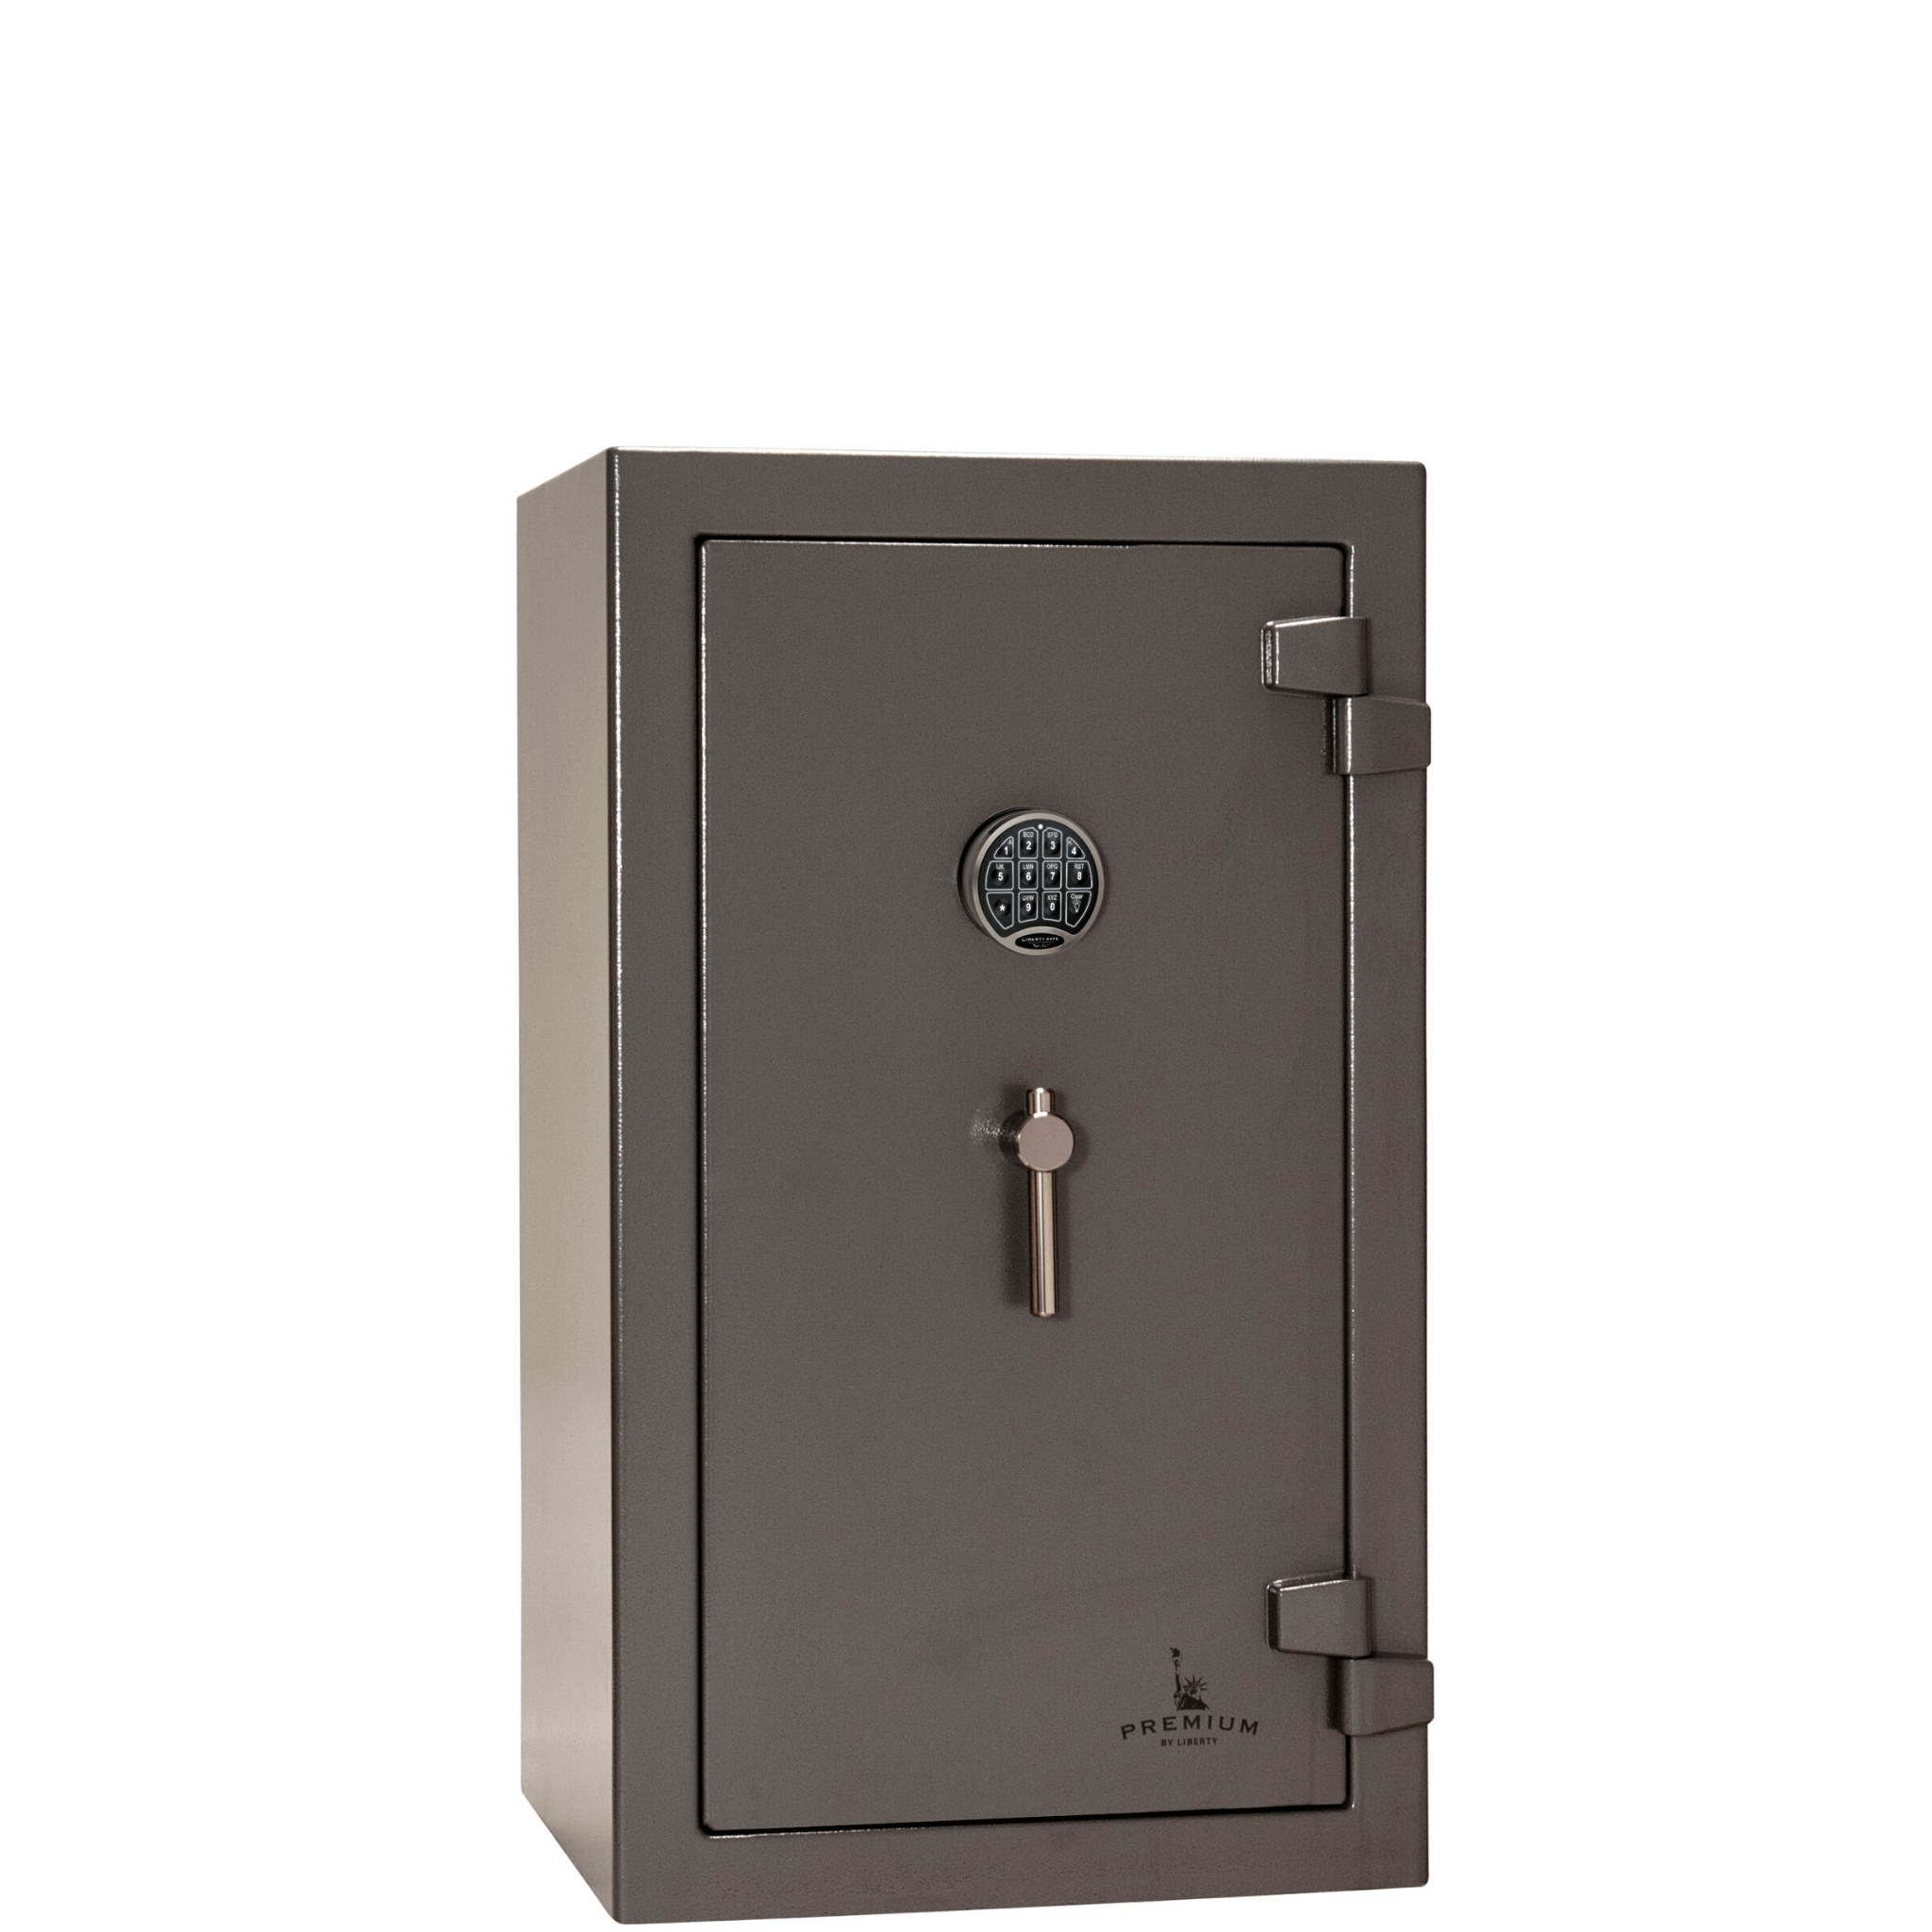 Premium Home | 12 | 90 Minute Fire Protection | Gray | Electronic Lock | Dimensions: 42"(H) x 24"(W) x 22.5"(D)